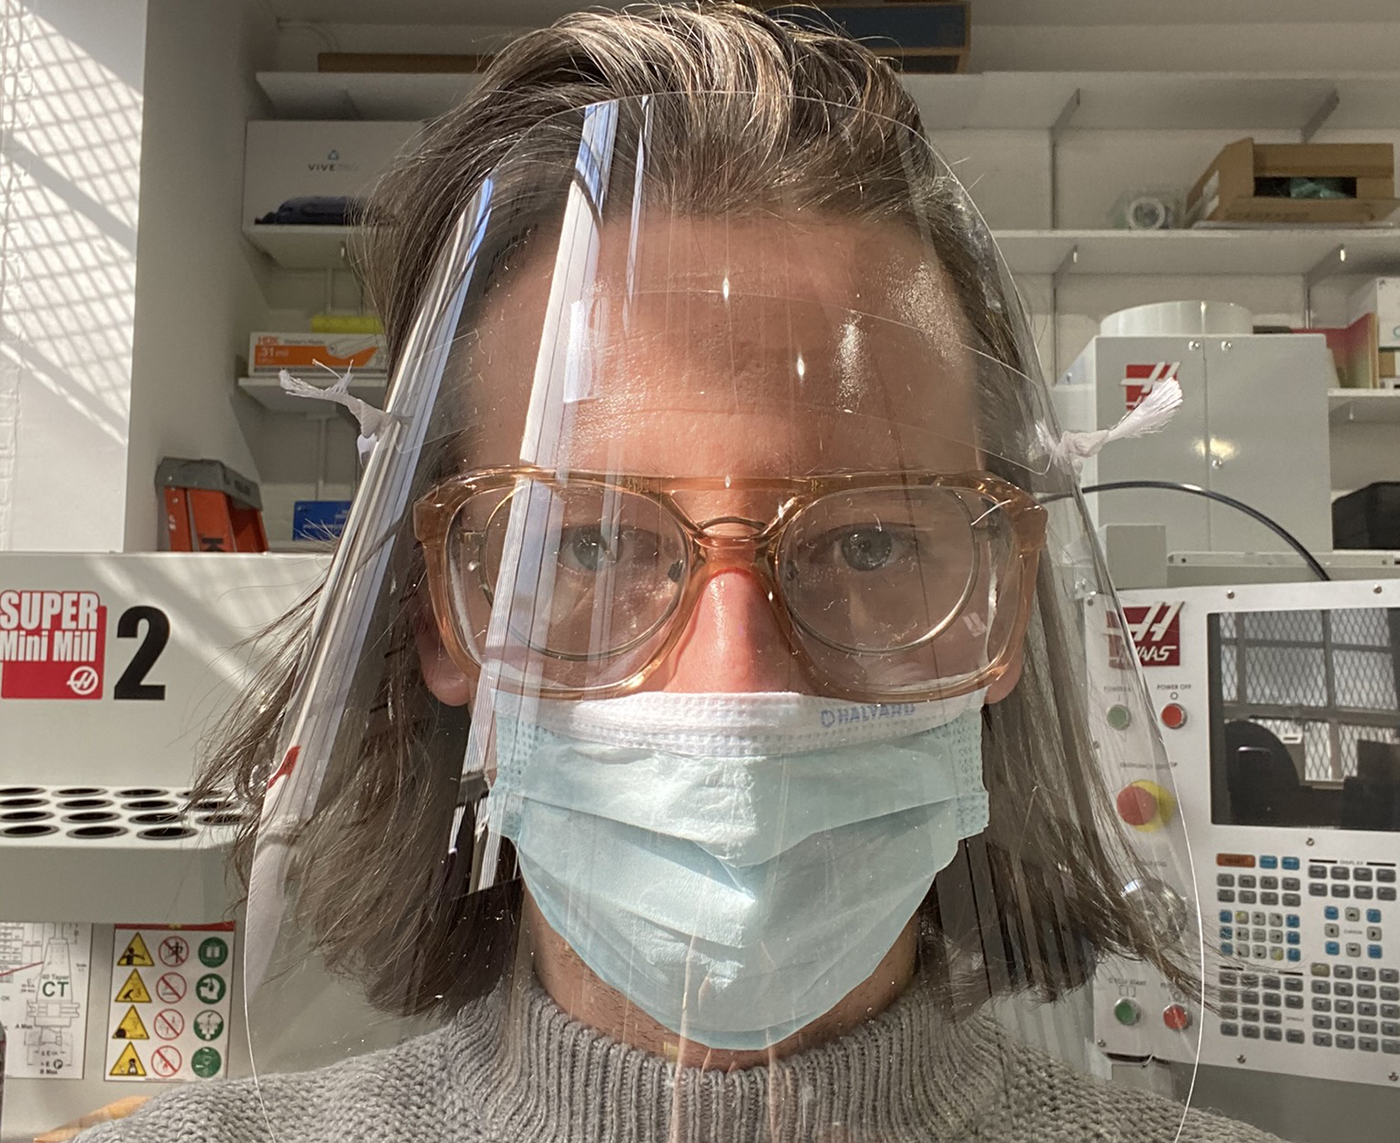 The first prototype of the Open Source Face Shield developed at NYU, made in Pratt’s Interdisciplinary Technology Lab (ITL) (photo by Scott Sorenson)